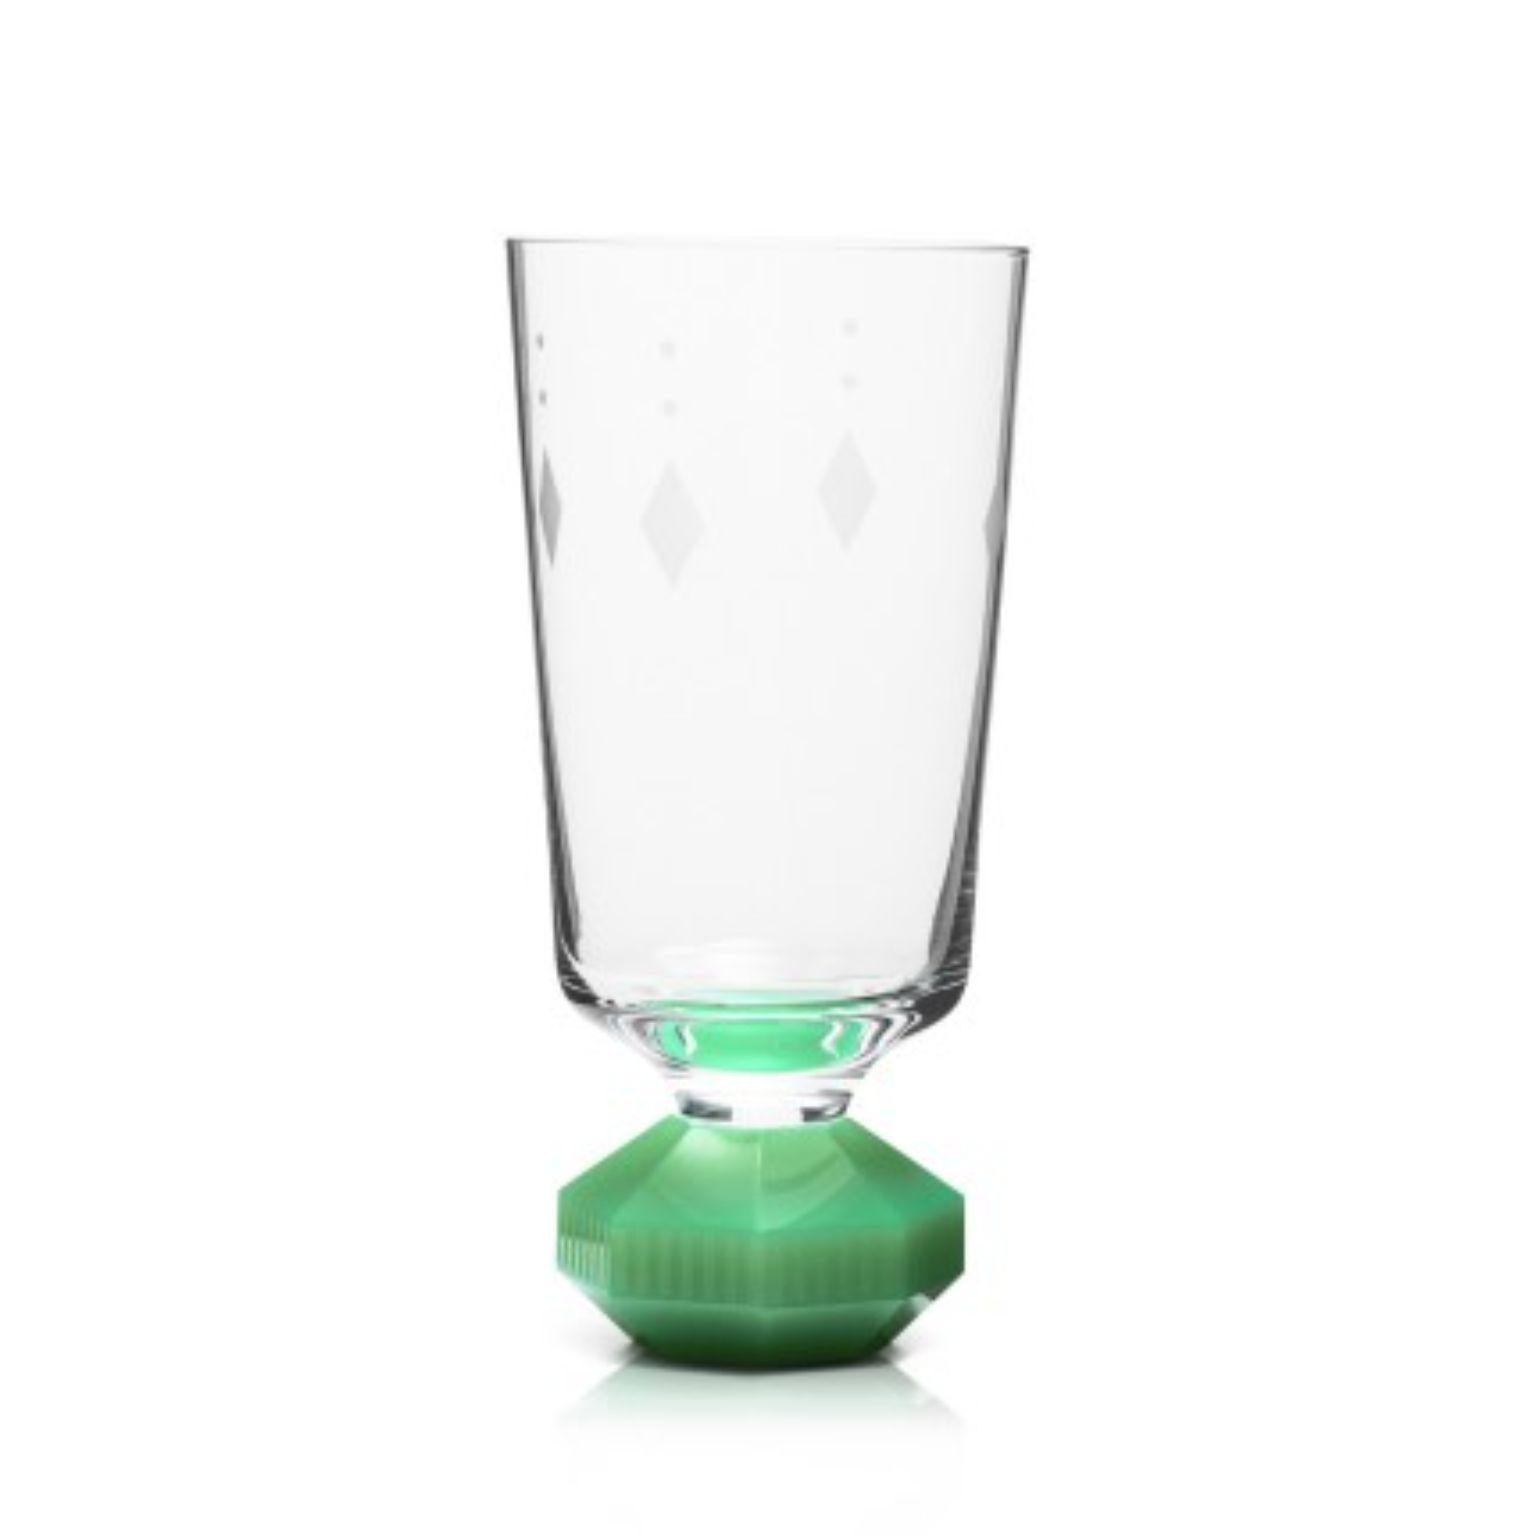 Chelsea tall green glass by Reflections Copenhagen
Dimensions: D7 x H15 cm
Materials: Fine hand cut crystal and glass
Other dimensions and colours are available.

The designers at Reflections Copenhagen are thrilled to introduce two new glasses